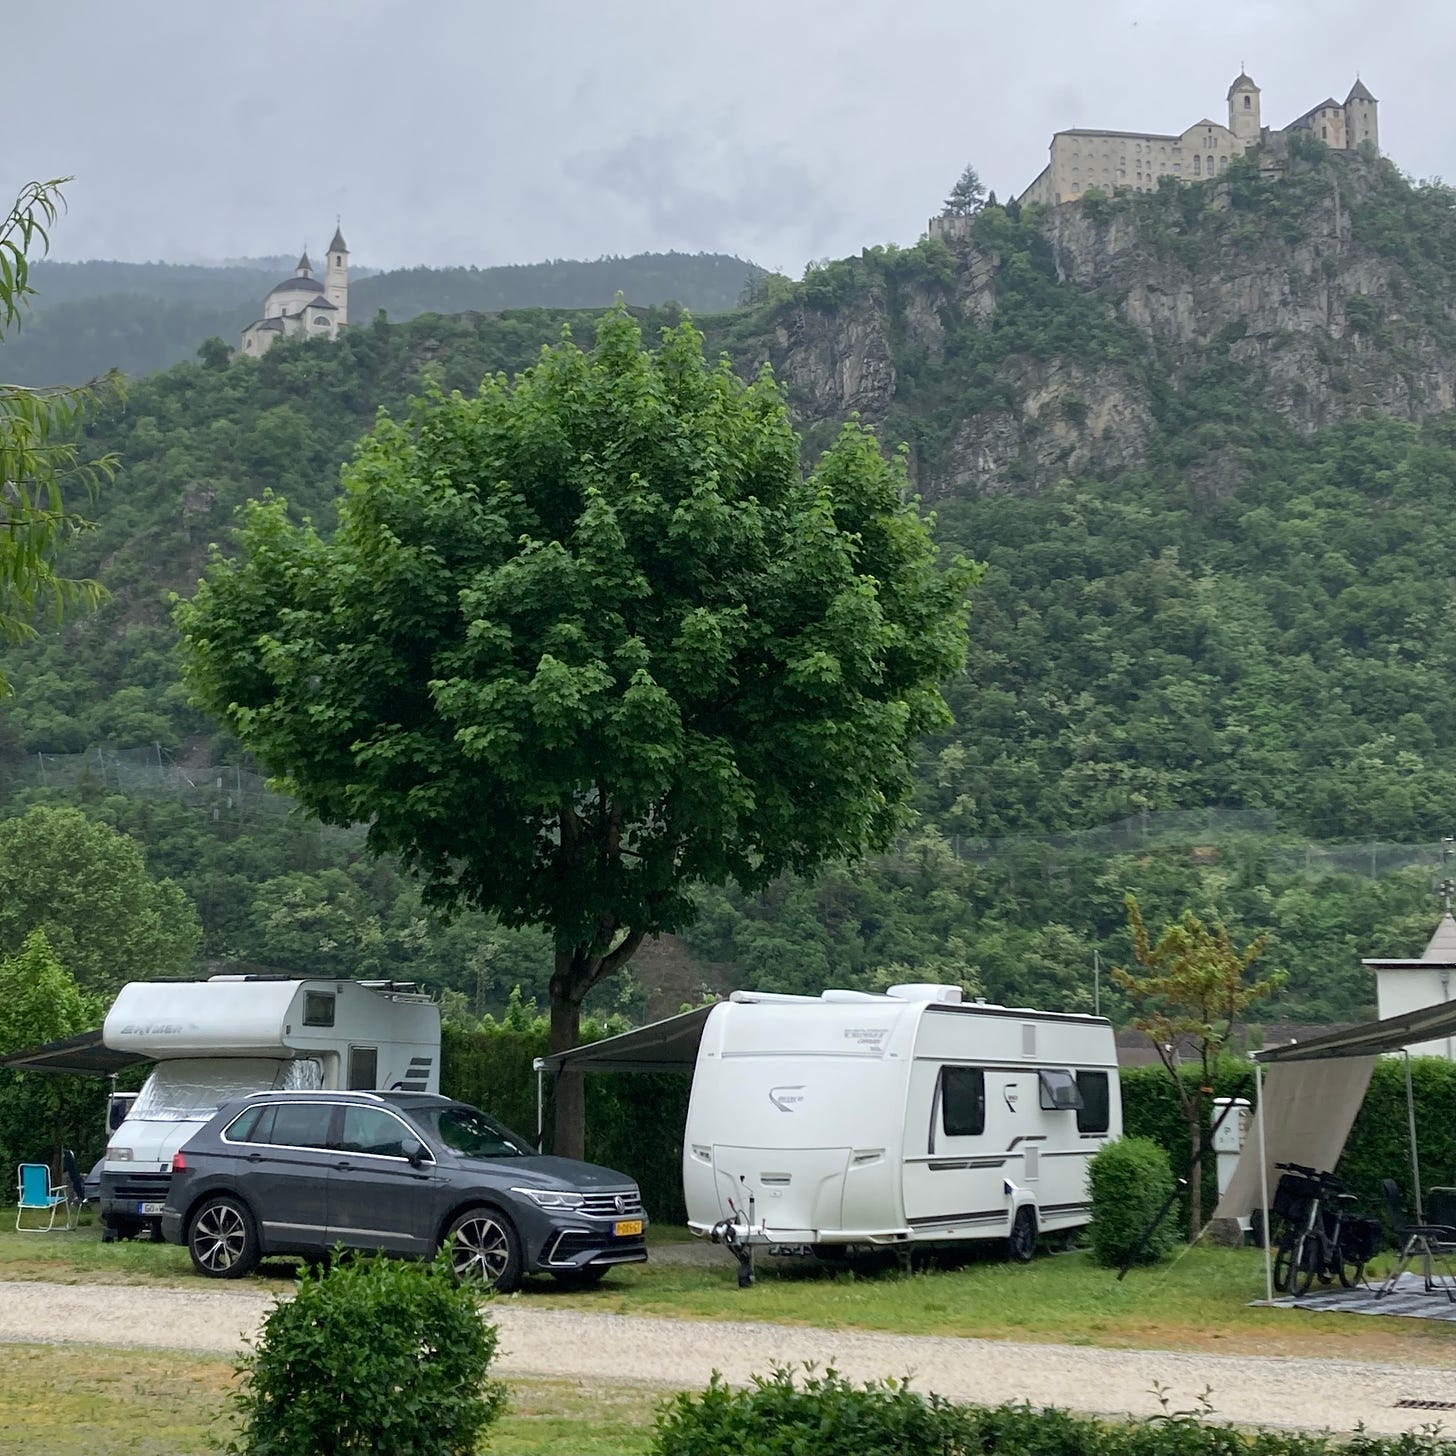 Photo of campground with hills in back holding a medieval castle and monastery